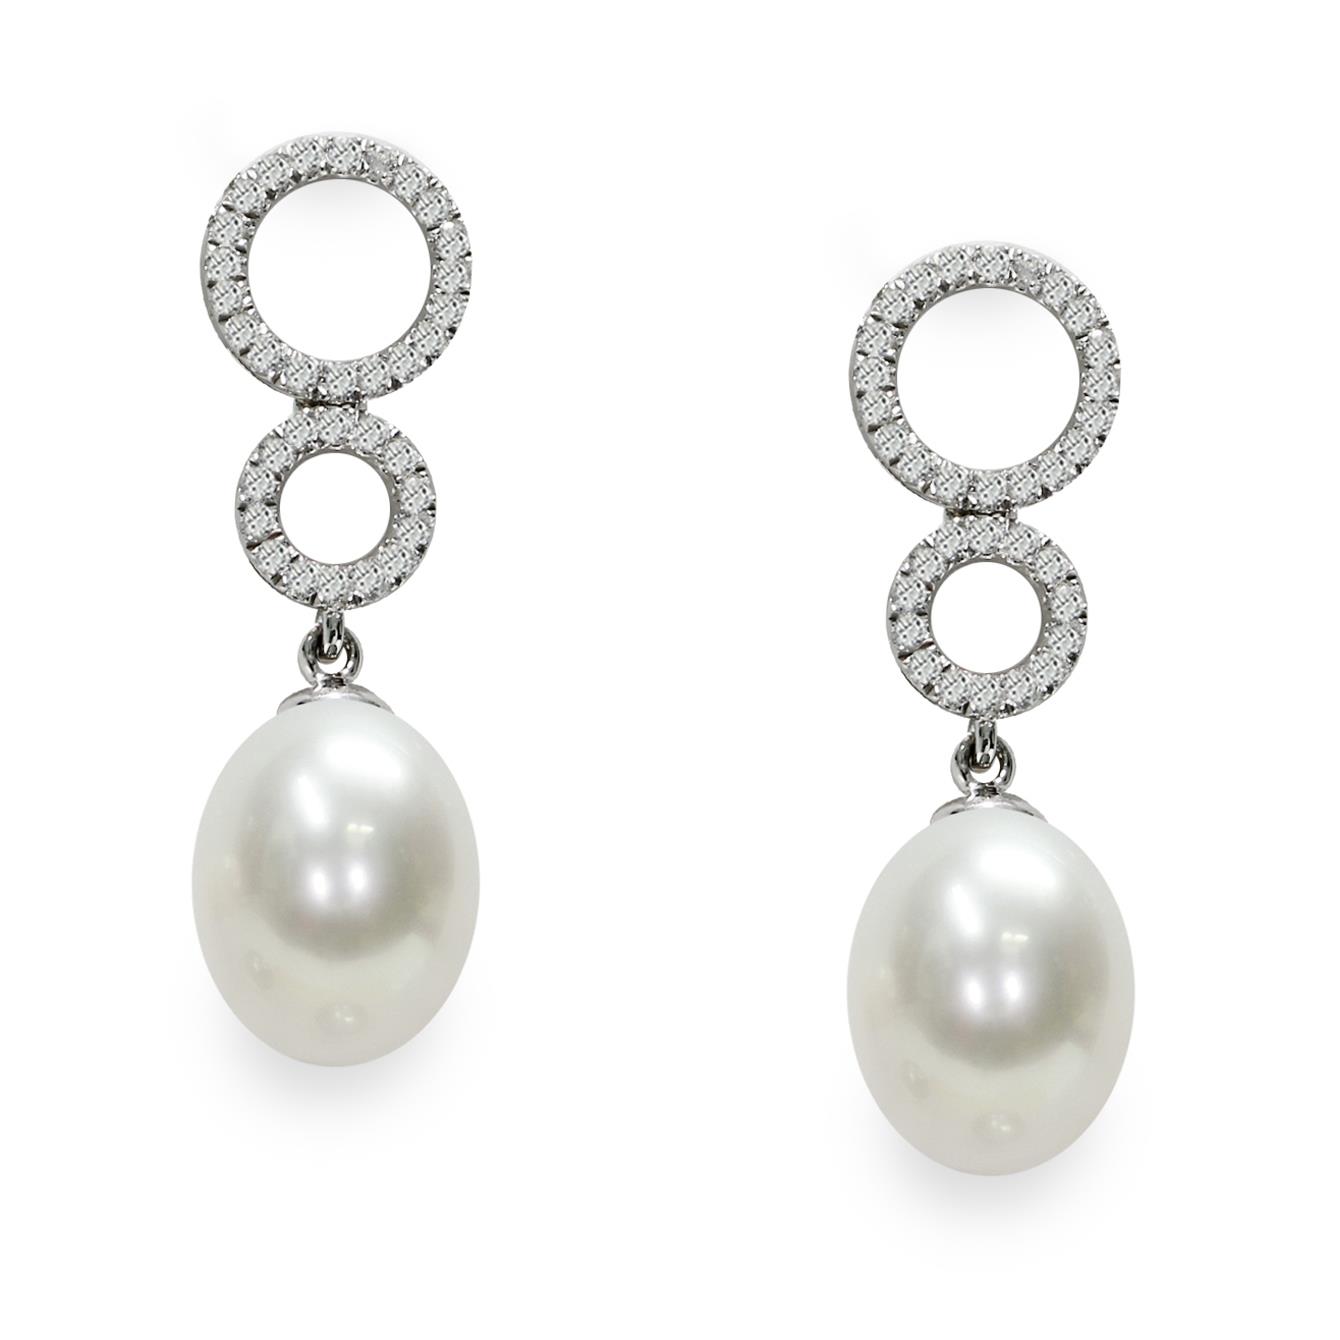 Silver pendant earrings with full pearlescent pearls and zircons - MAYUMI